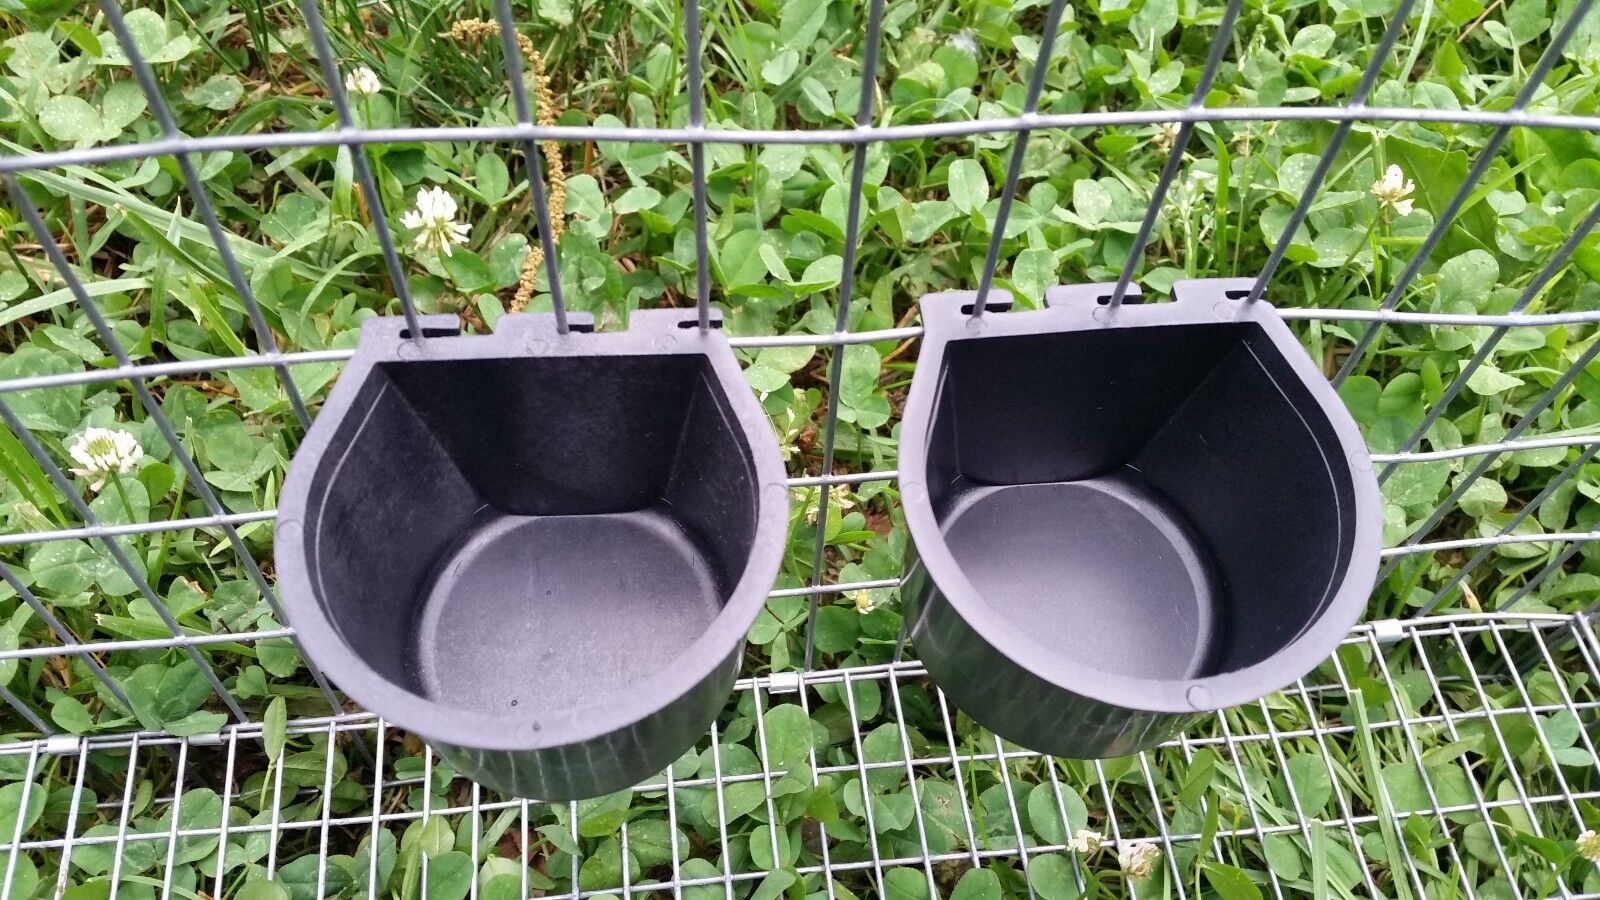 Set of 2 Feeder / Water Cups for Small Animal, Rabbit or Quail Wire Cages.   Game Bird Supply - фотография #3